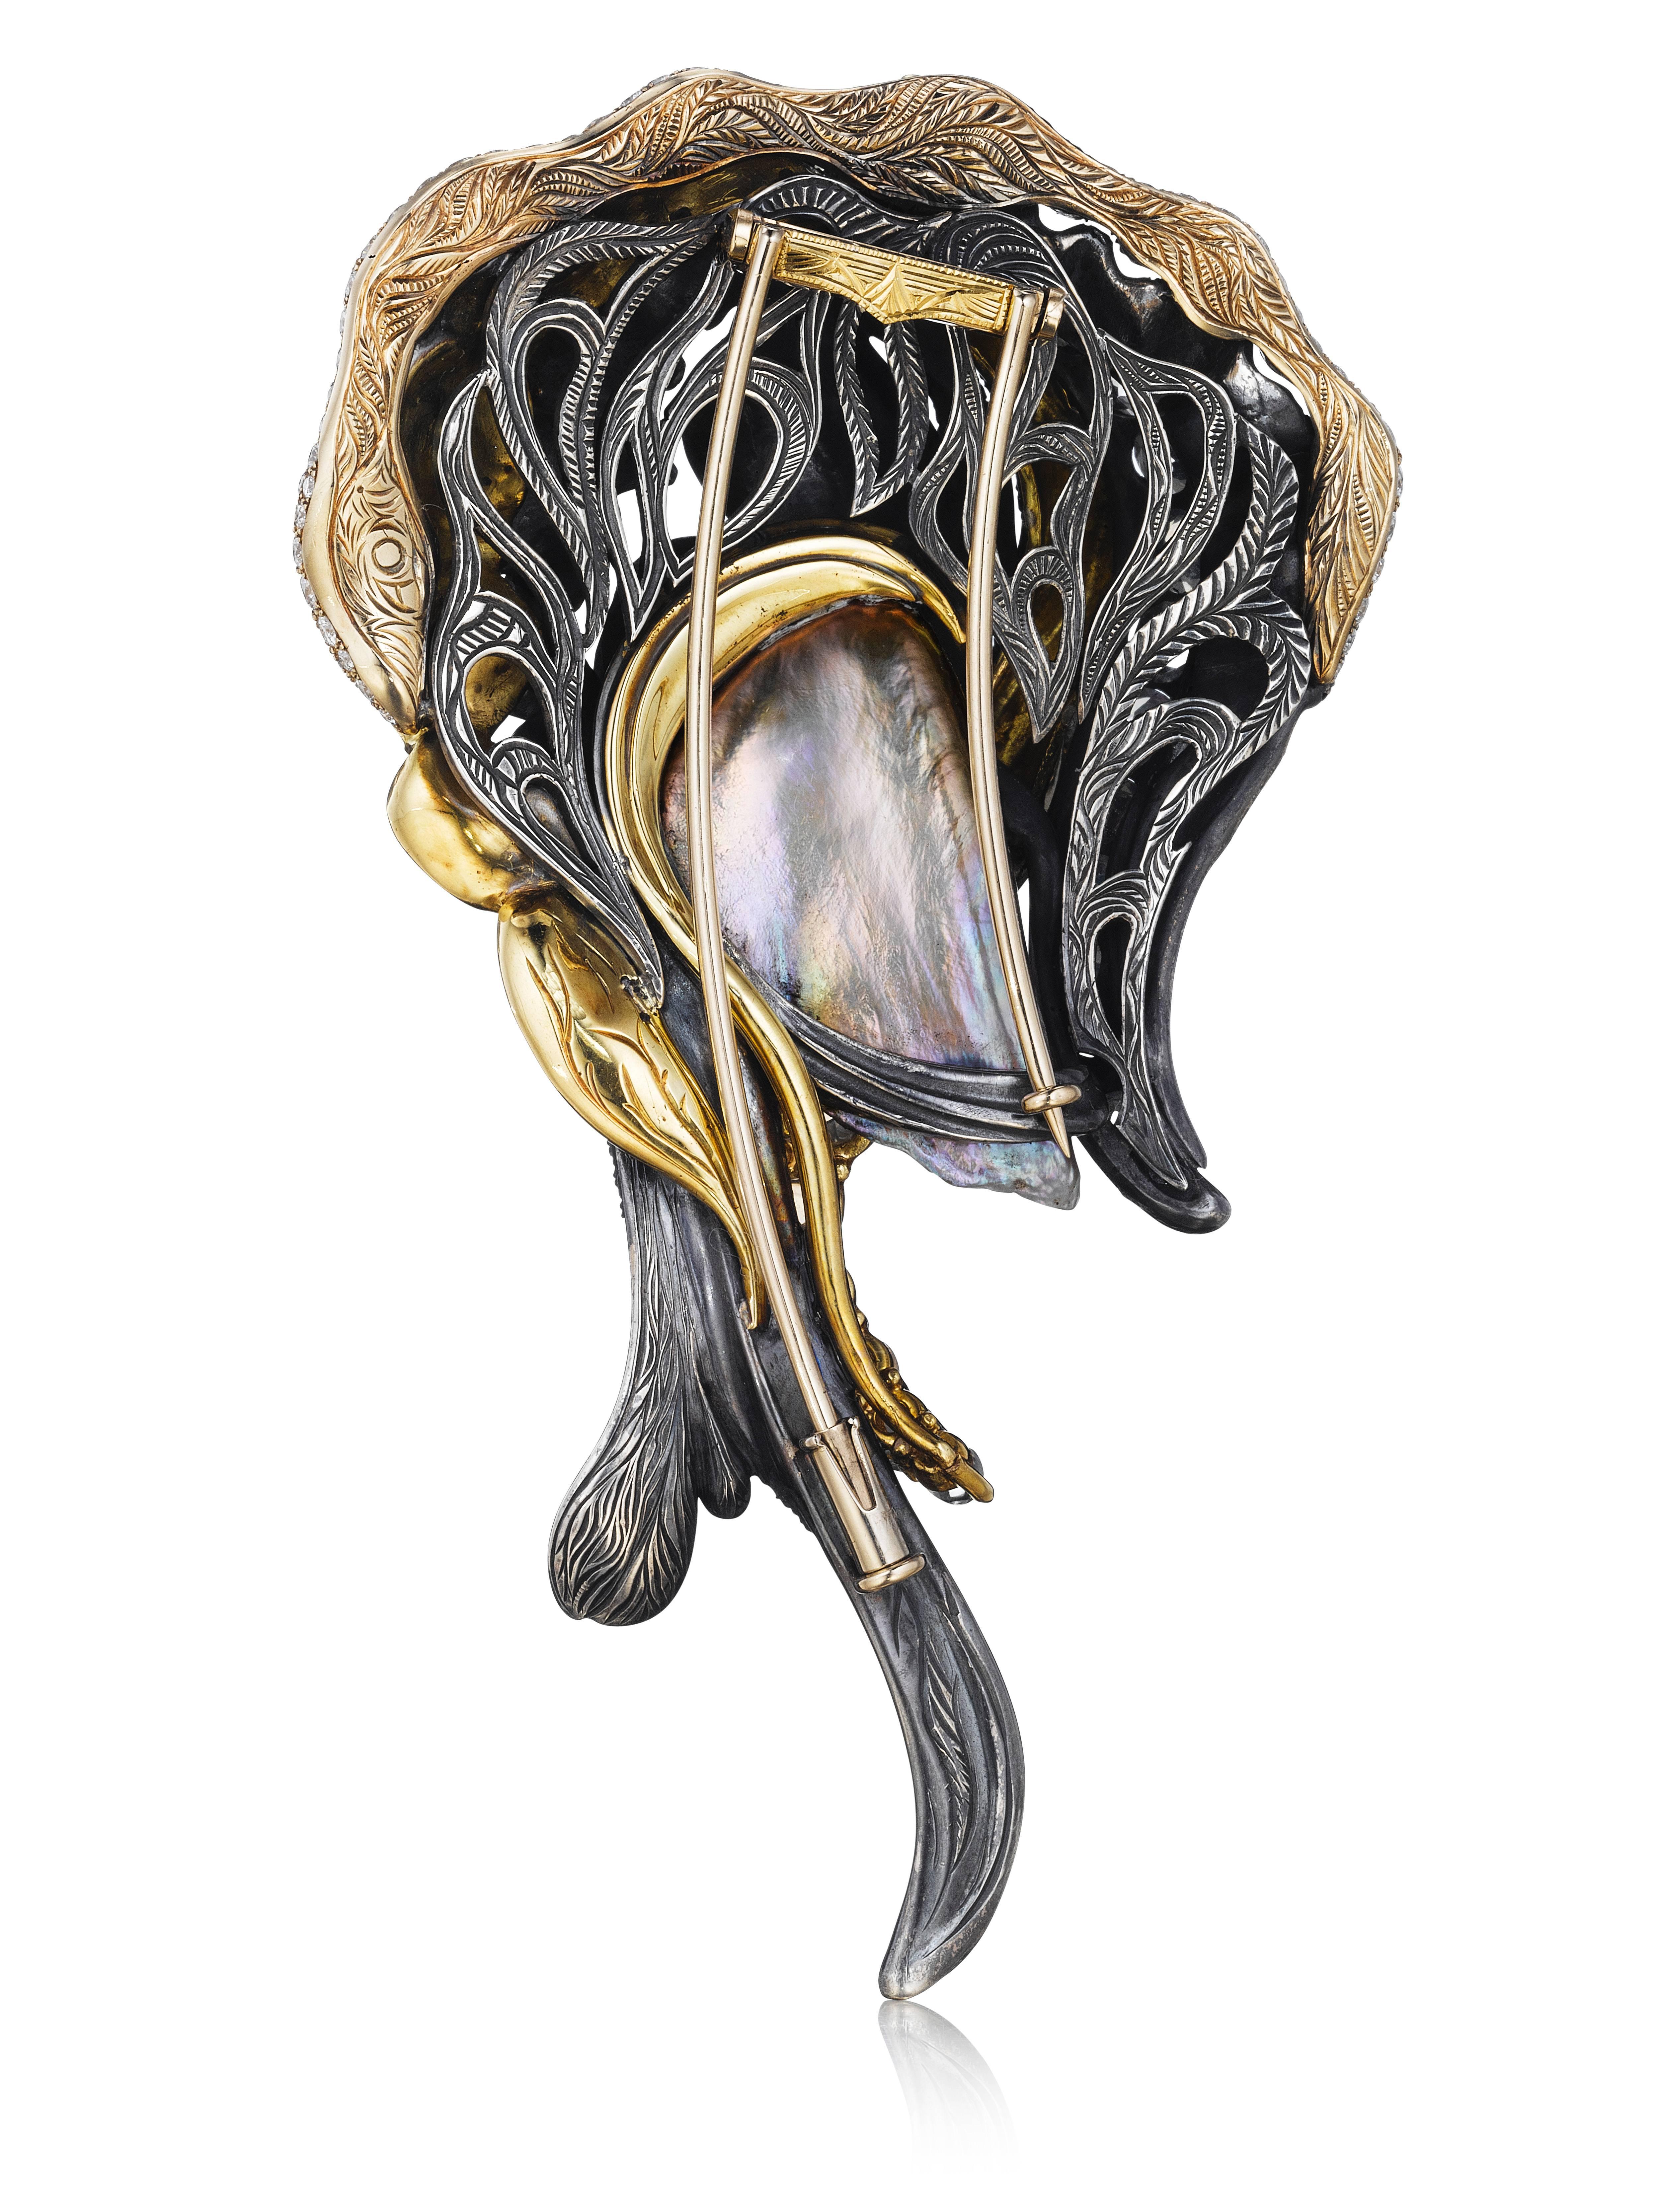 This magnificent one of a kind brooch features a natural GIA certified Chinese freshwater pearl. The pearl is accentuated with beautiful layers of platinum, 18K yellow gold, 18K white gold, and sterling silver. The various fine metals are set with